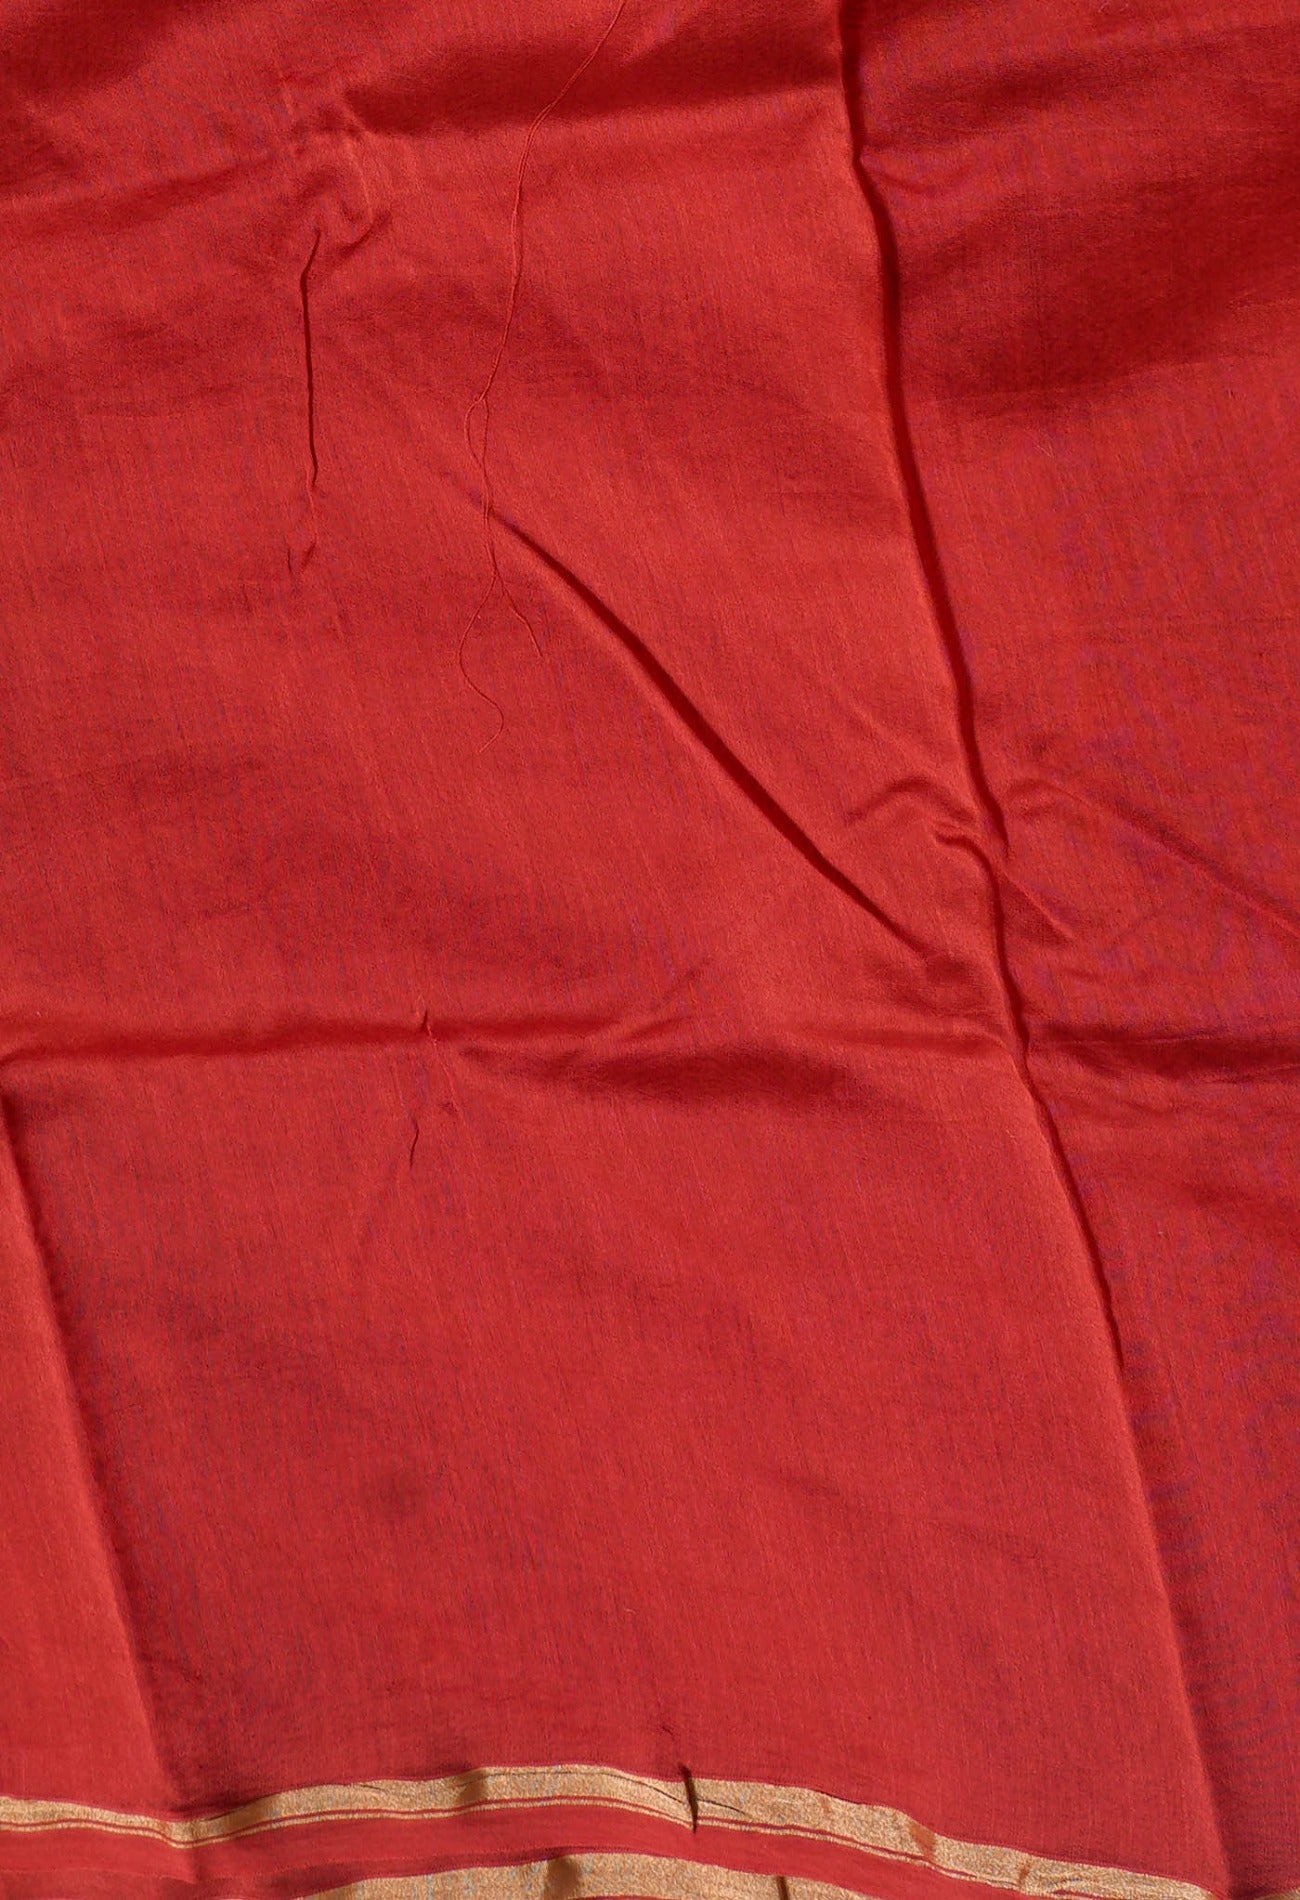 Online Shopping for Red Pure Chanderi Sico Saree with Weaving from Madhya Pradesh at Unnatisilks.com India
